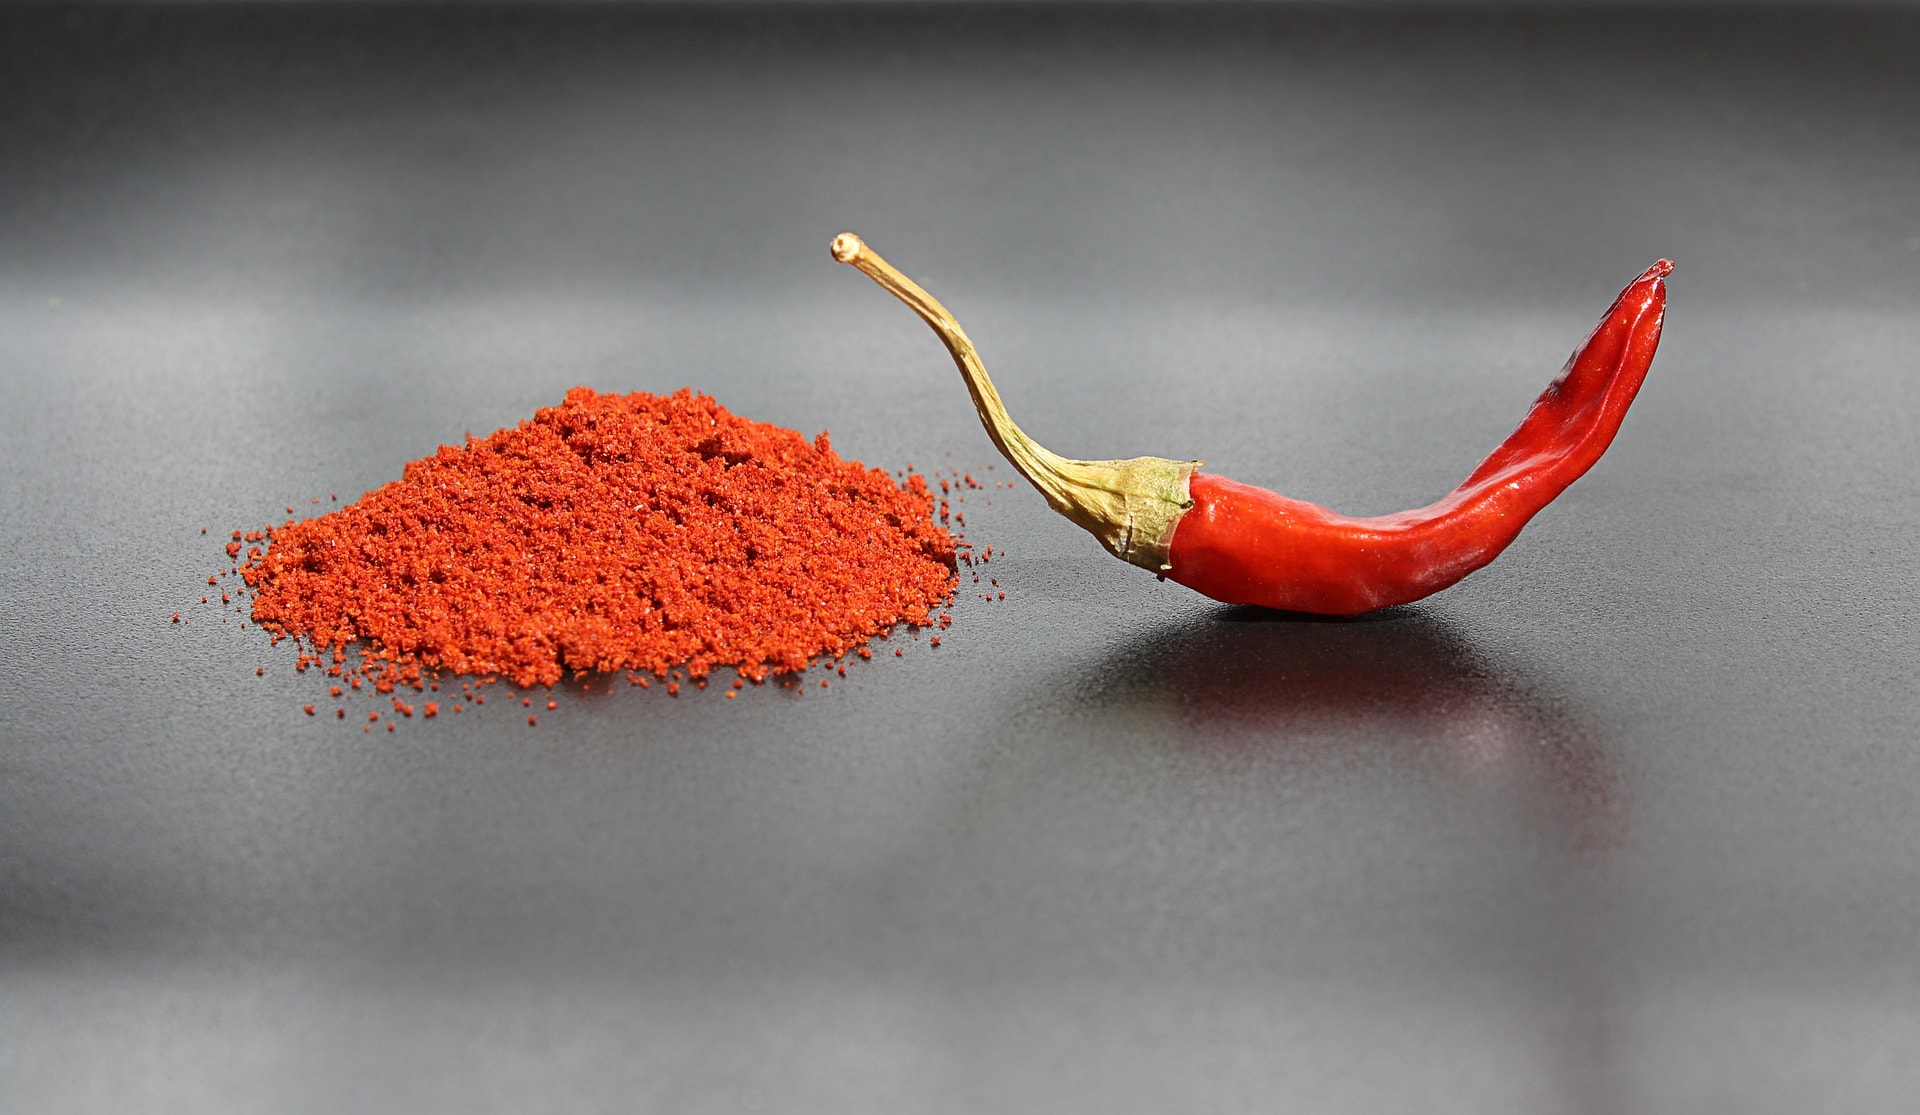 pile of red pepper powder on the left and a red chili pepper on the right on a gray background